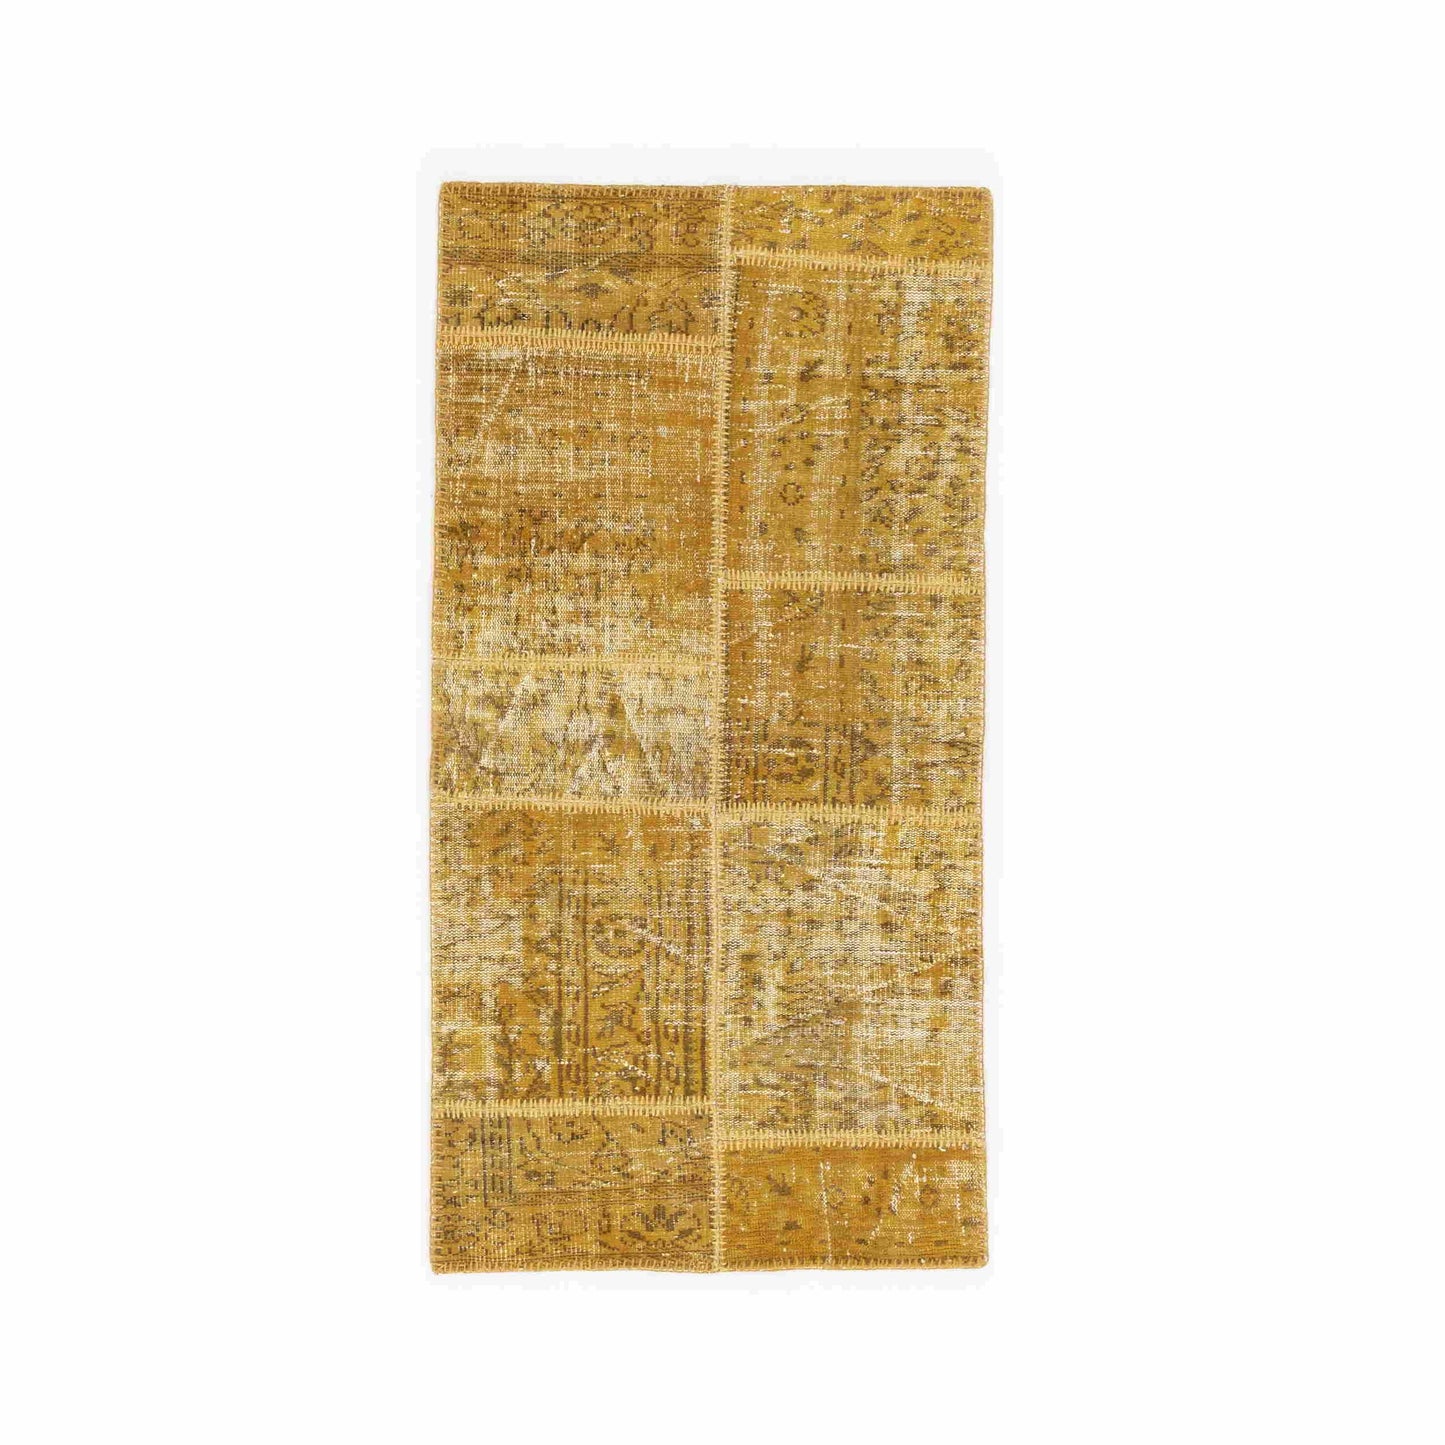 Oriental Rug Patchwork Hand Knotted Wool On Wool 99 x 195 Cm – 3' 3'' x 6' 5'' ER01